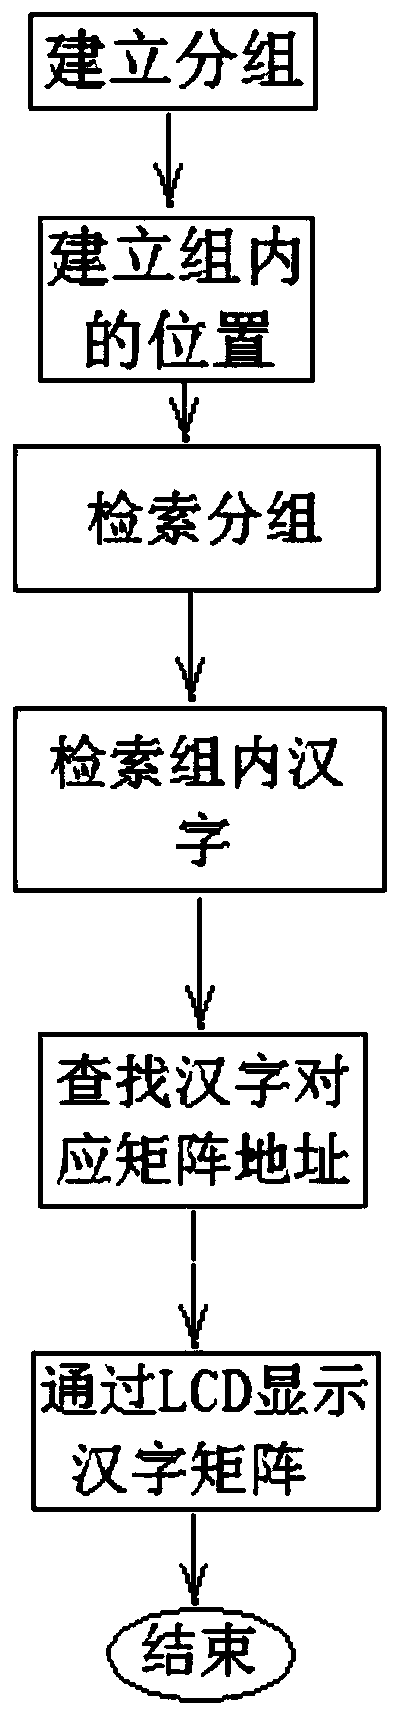 A method for displaying Chinese characters through rapid retrieval